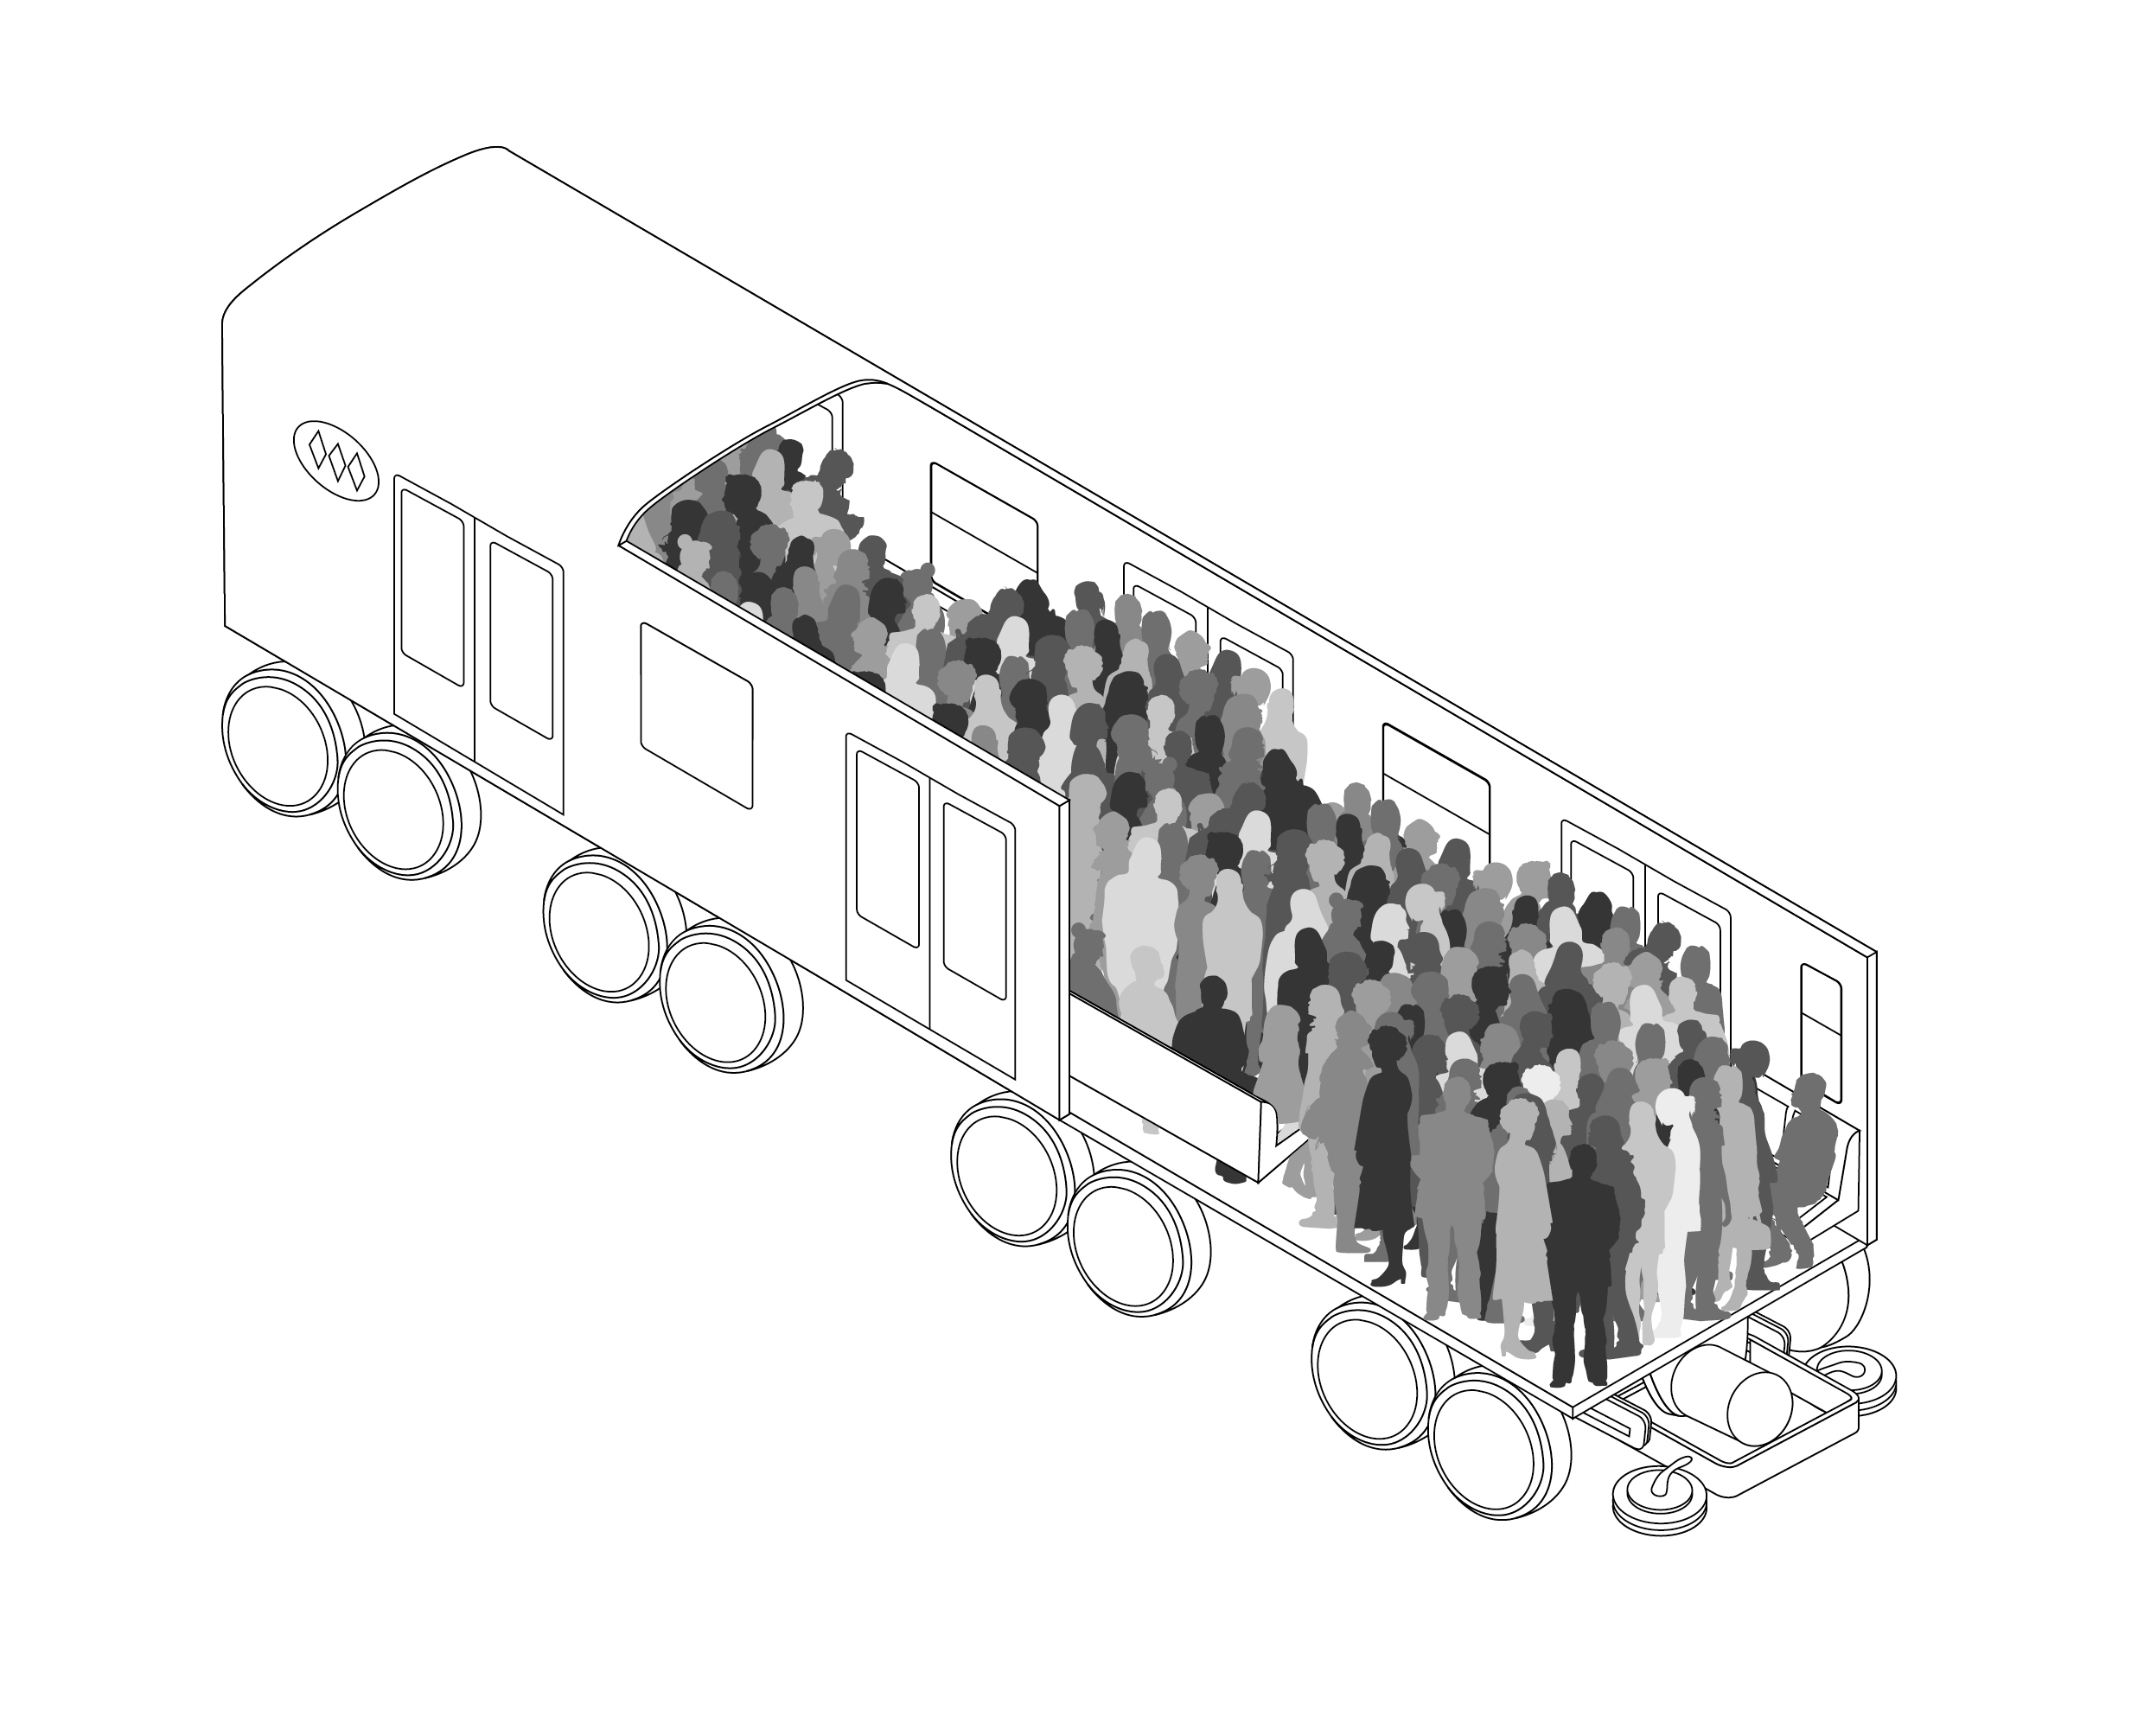 Figure 6-22 is a graphic showing a rapid transit vehicle with sitting and standing passengers. 